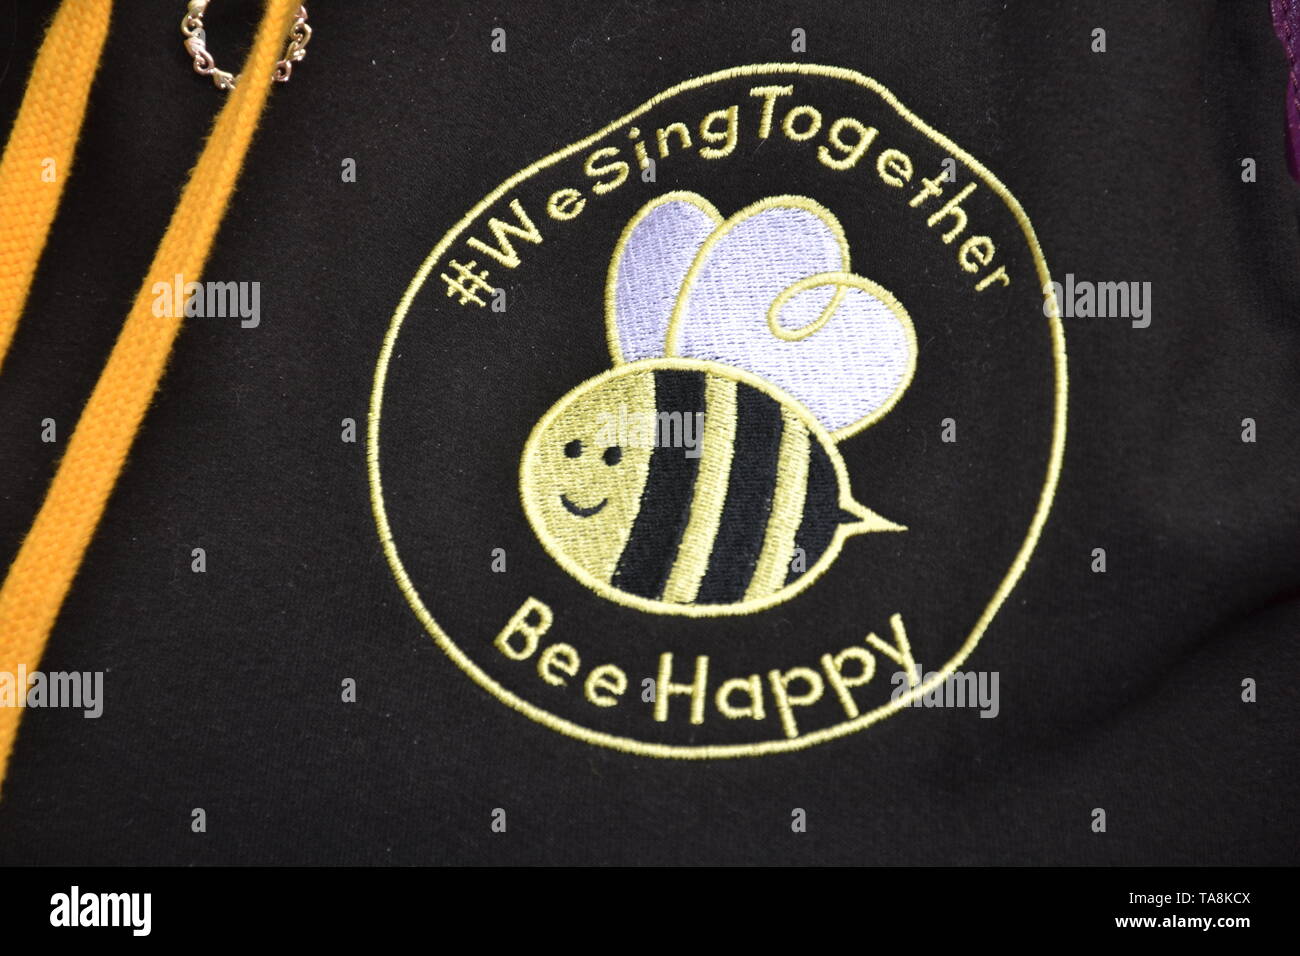 22nd May, 2019. Second Anniversary Commemoration of the Manchester Arena Bomb terror attack which left 22 people dead: members of the Manchester Survivors Choir sing in St Ann's Square, Manchester. uk. Photo shows the logo members of the choir all wear on their jackets. The Bee is a symbol of Manchester, uk. Stock Photo